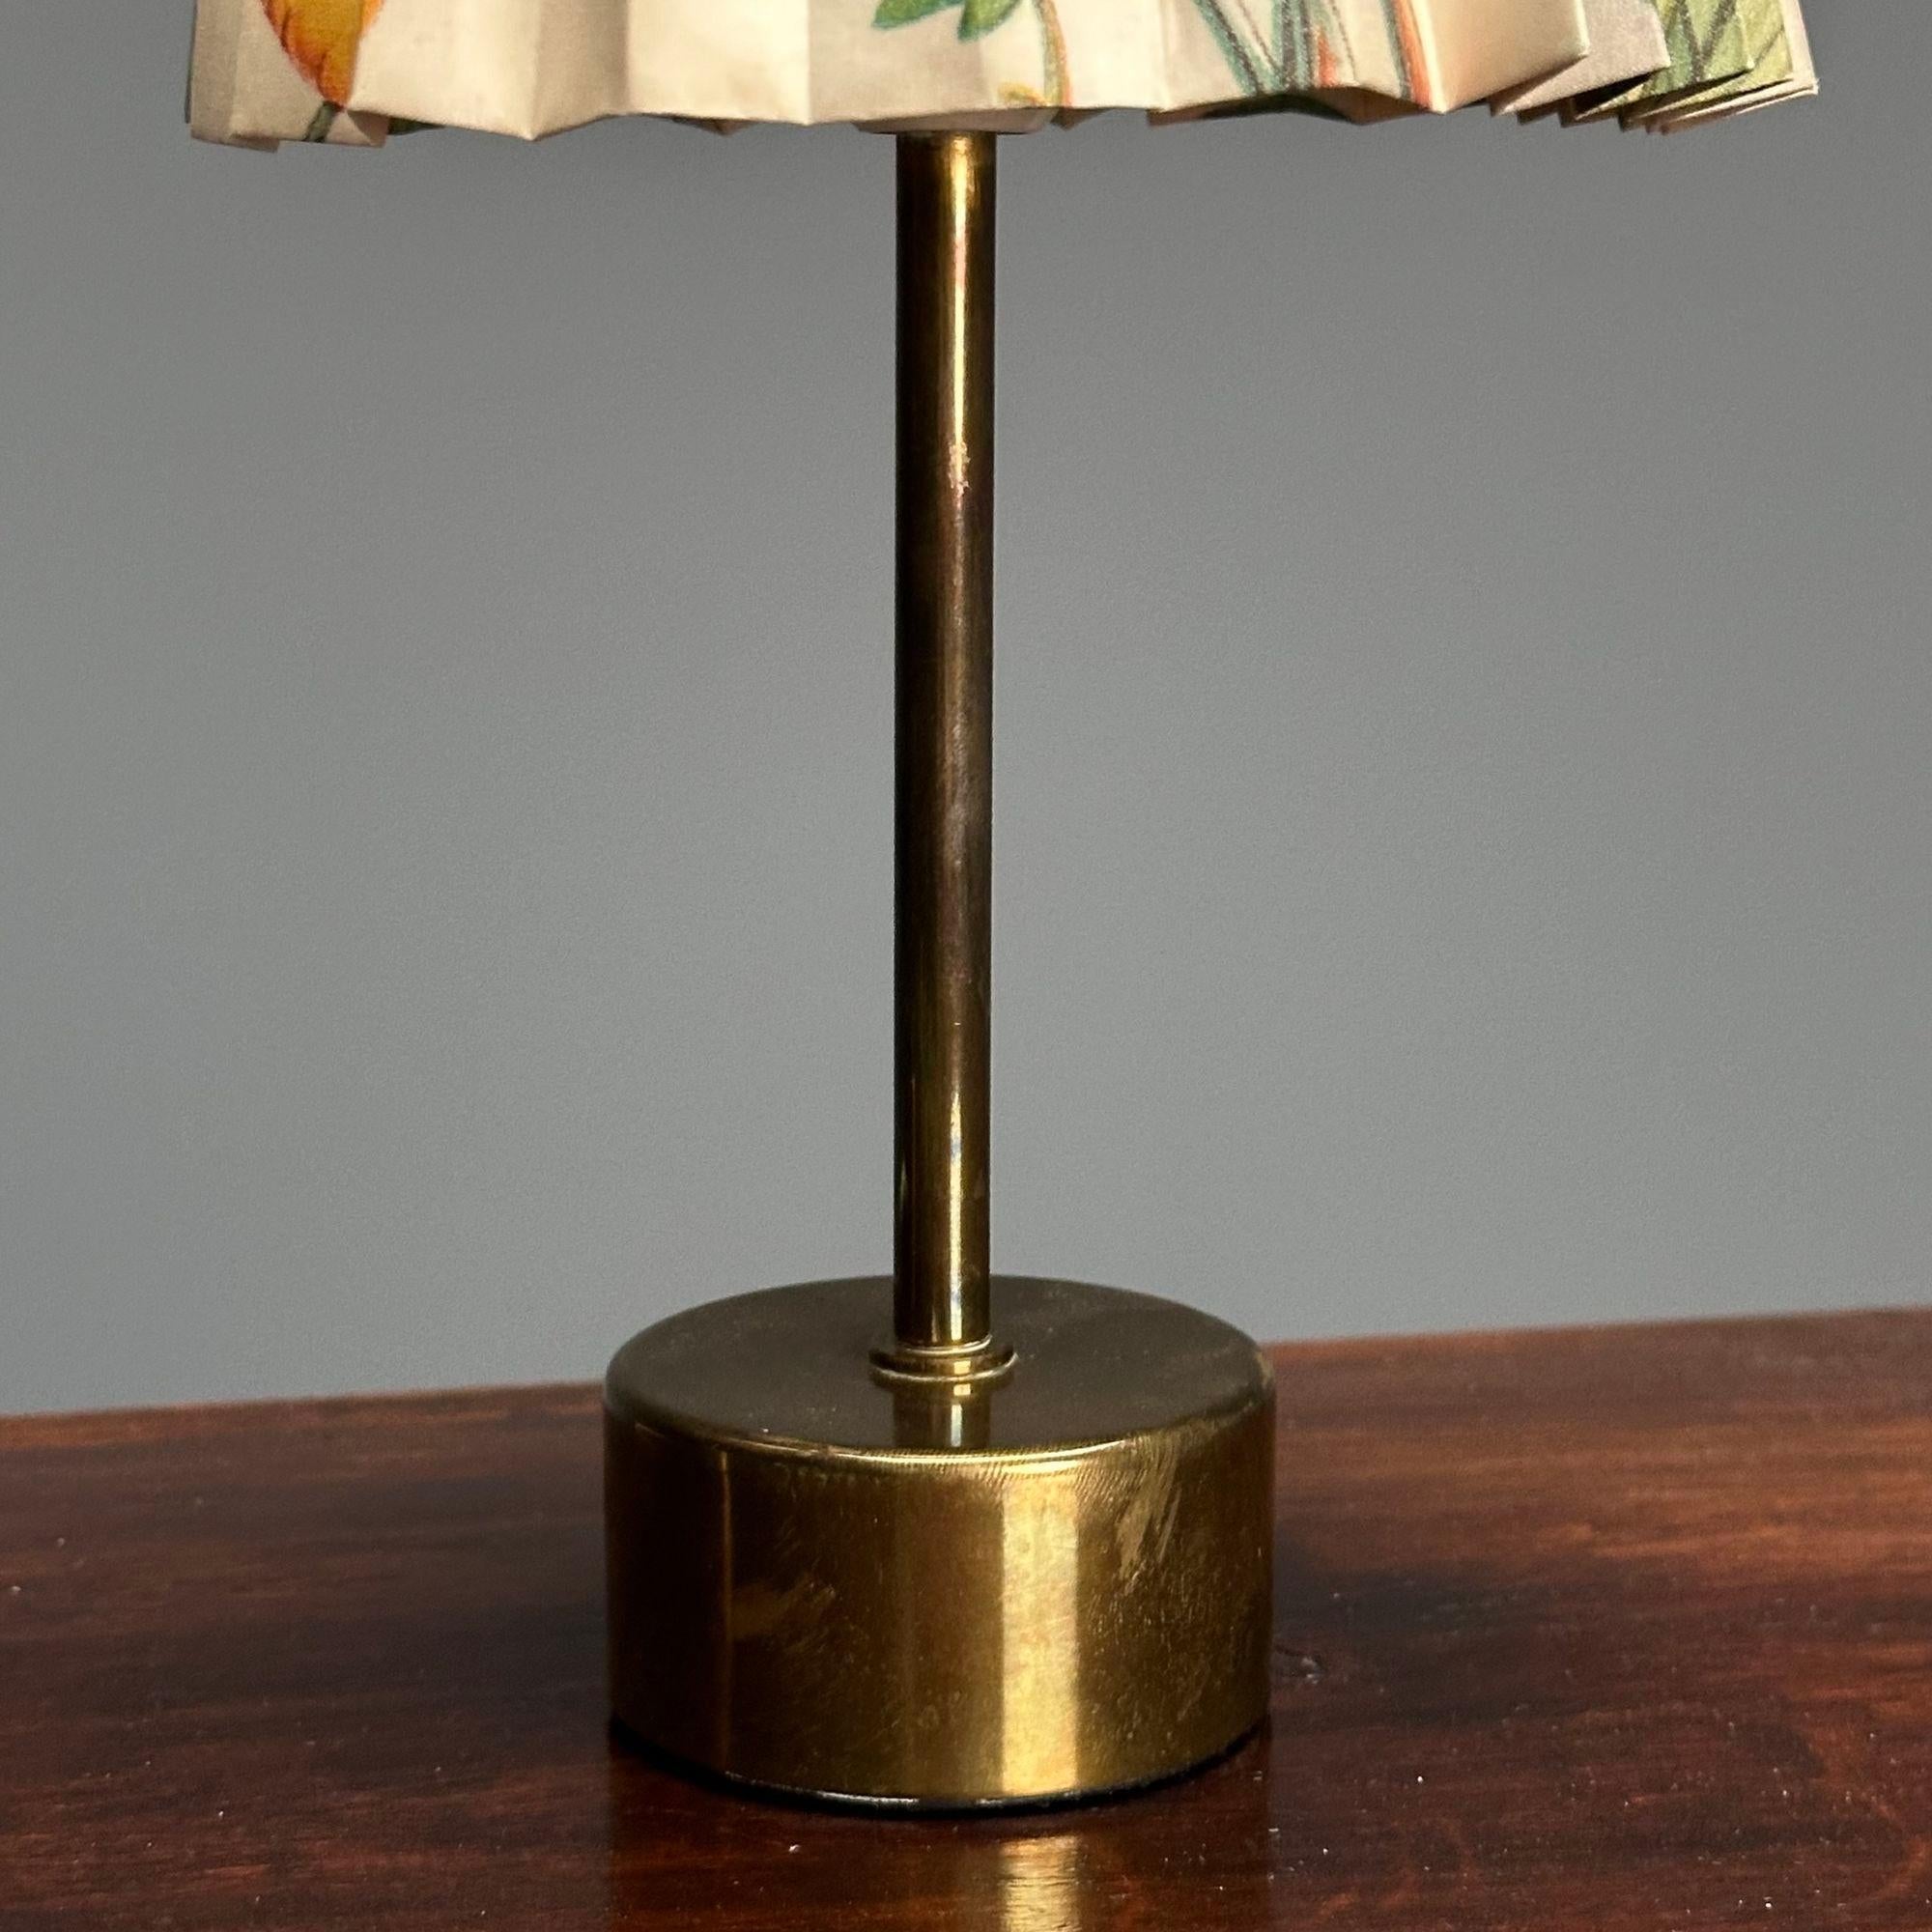 ASEA, Swedish Mid-Century Modern Table Lamps, Brass, Floral Shades, Sweden 1950s For Sale 2